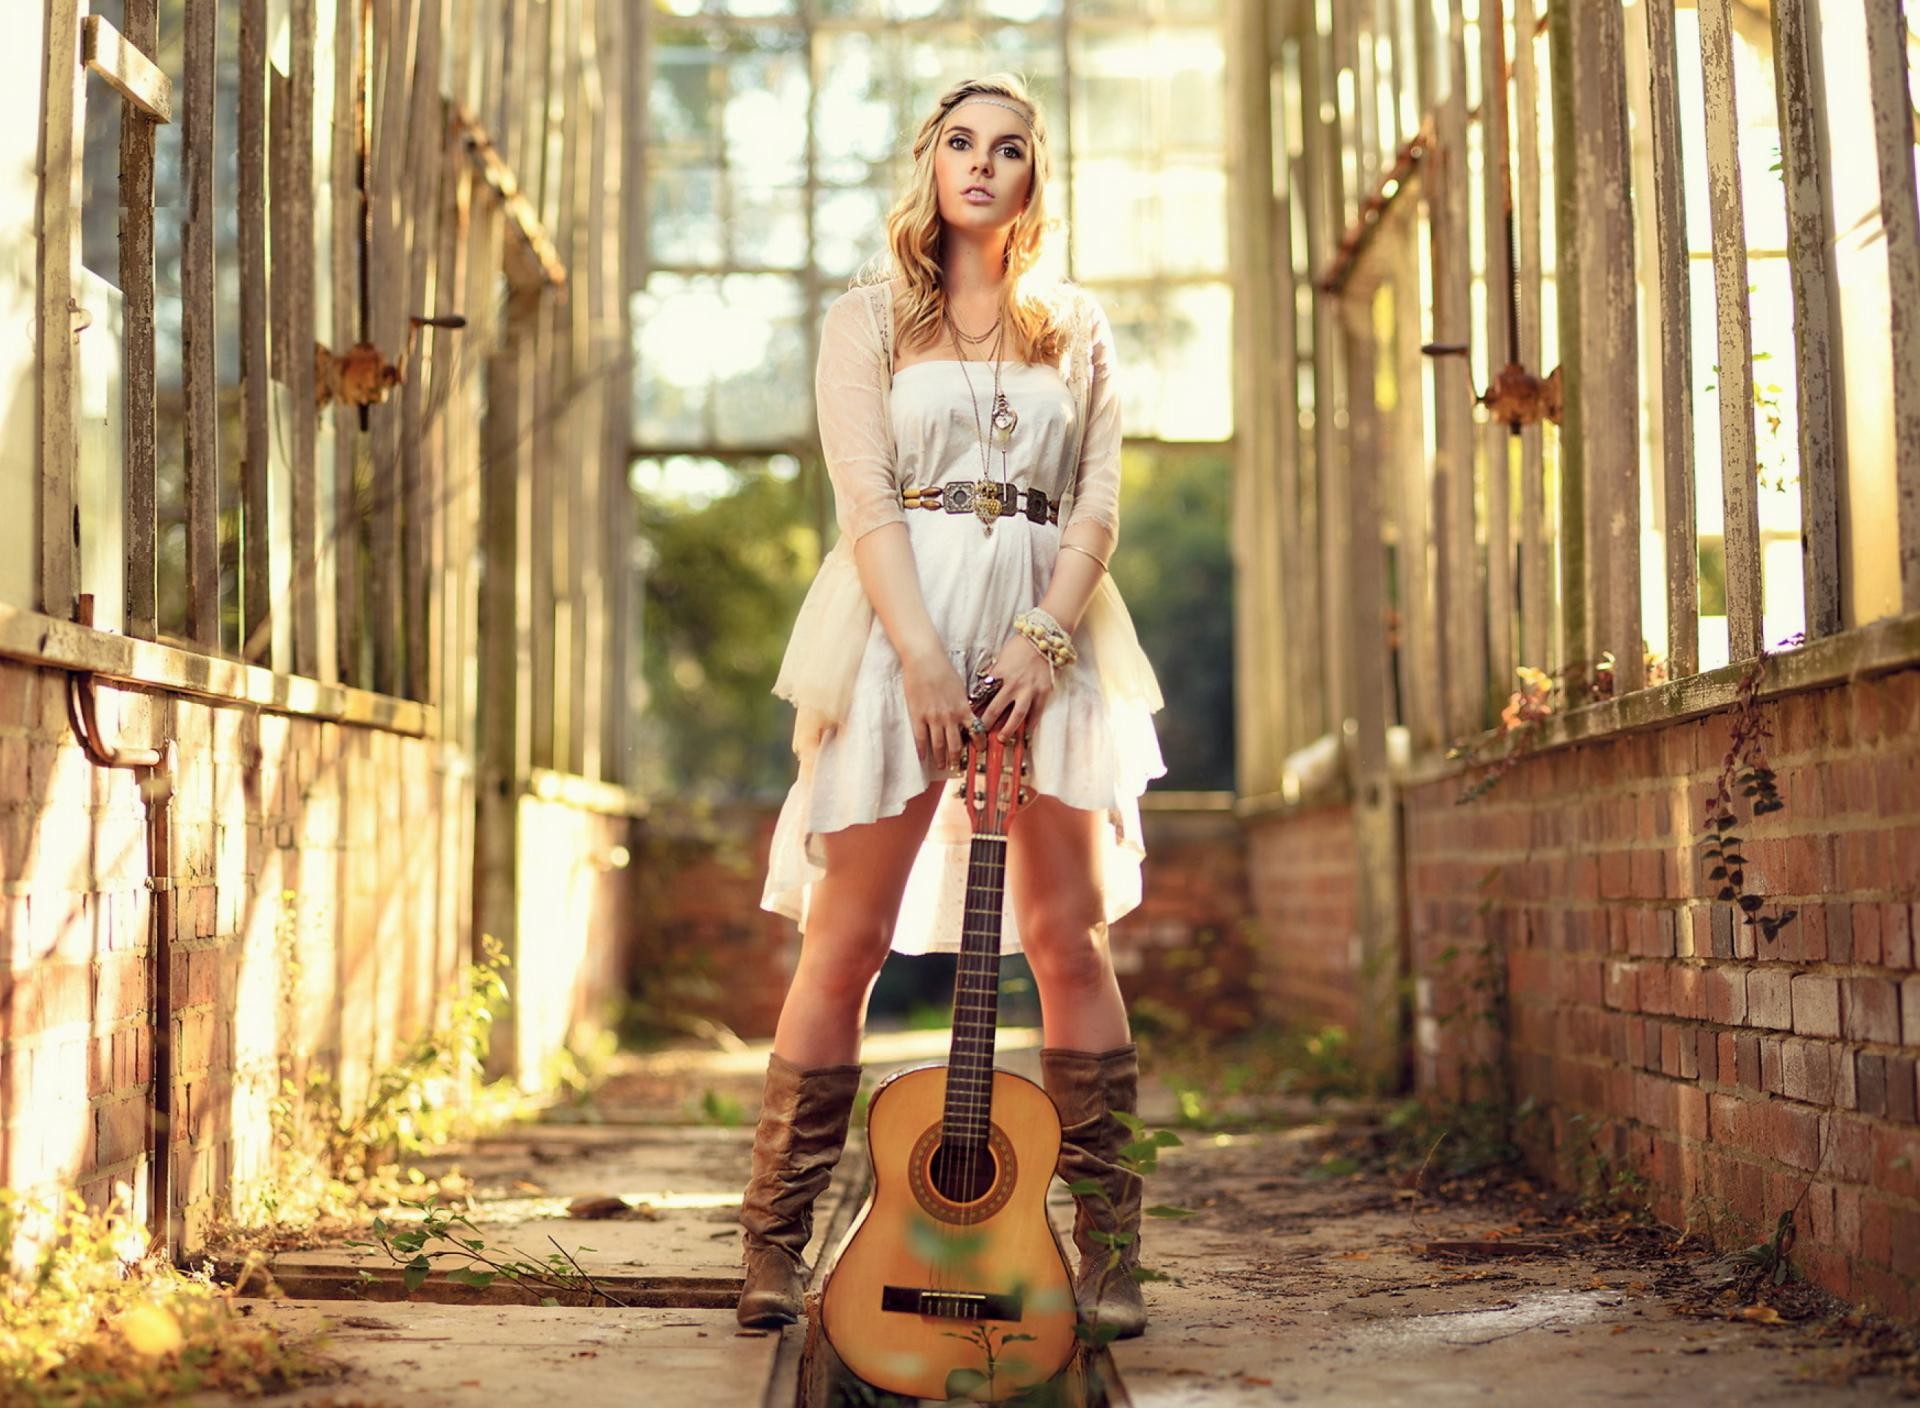 1920x1408 wallpaper.wiki-Girl-With-Guitar-Chic-Country-Style.